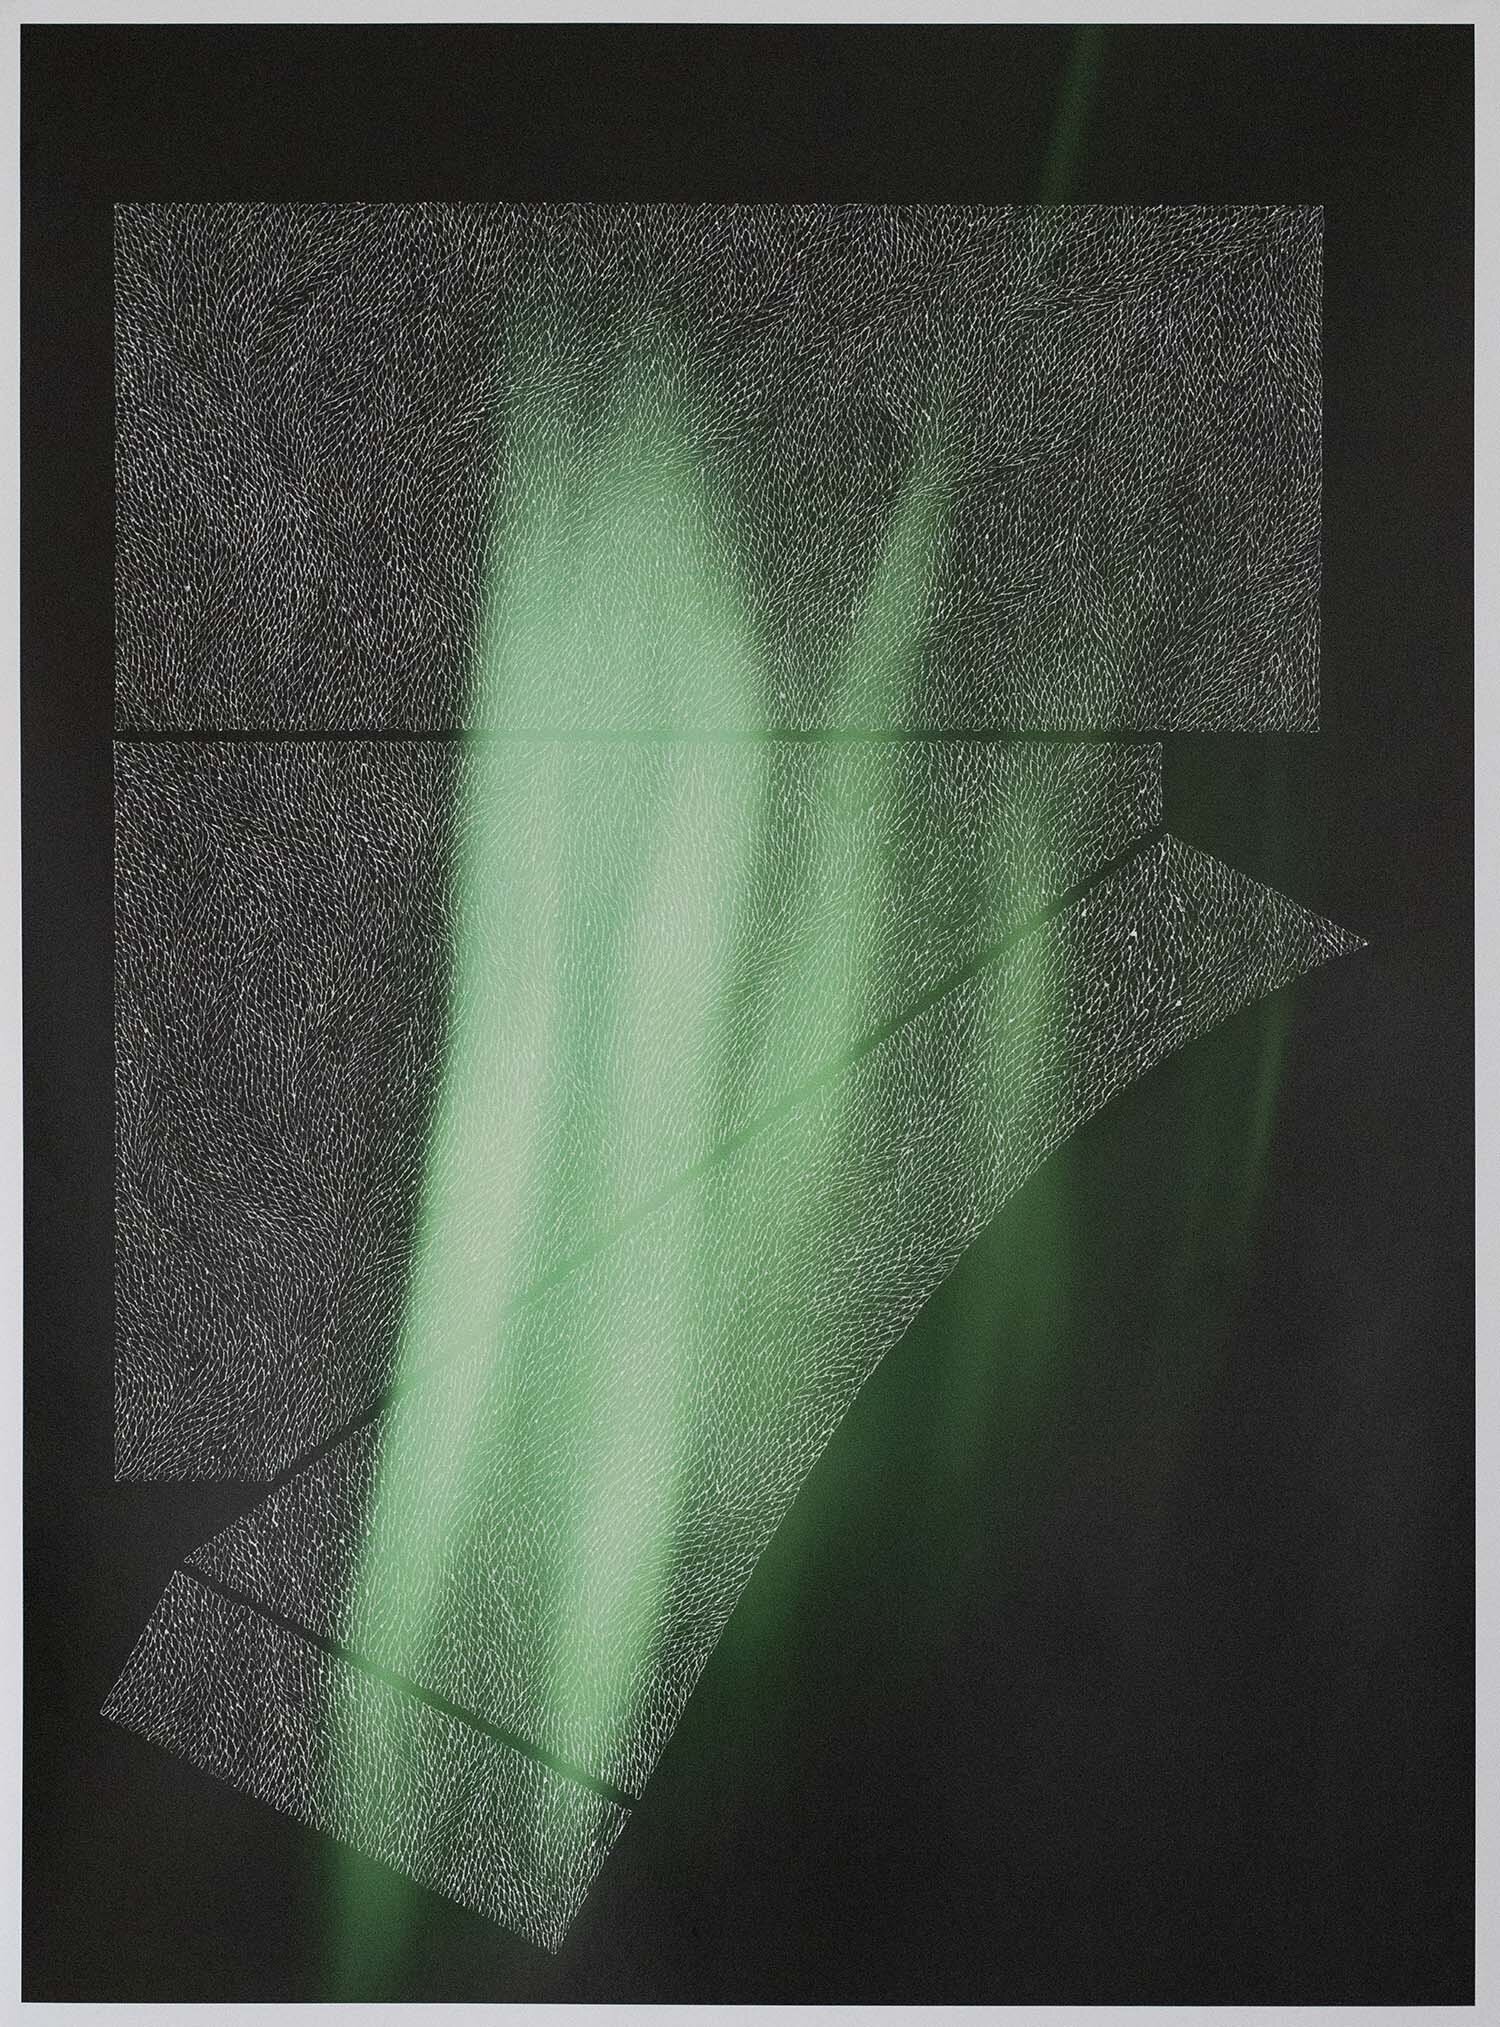   Green #2  38x27.5 inches 2019 x-acto blade etching on hahnemuhle rag paper   